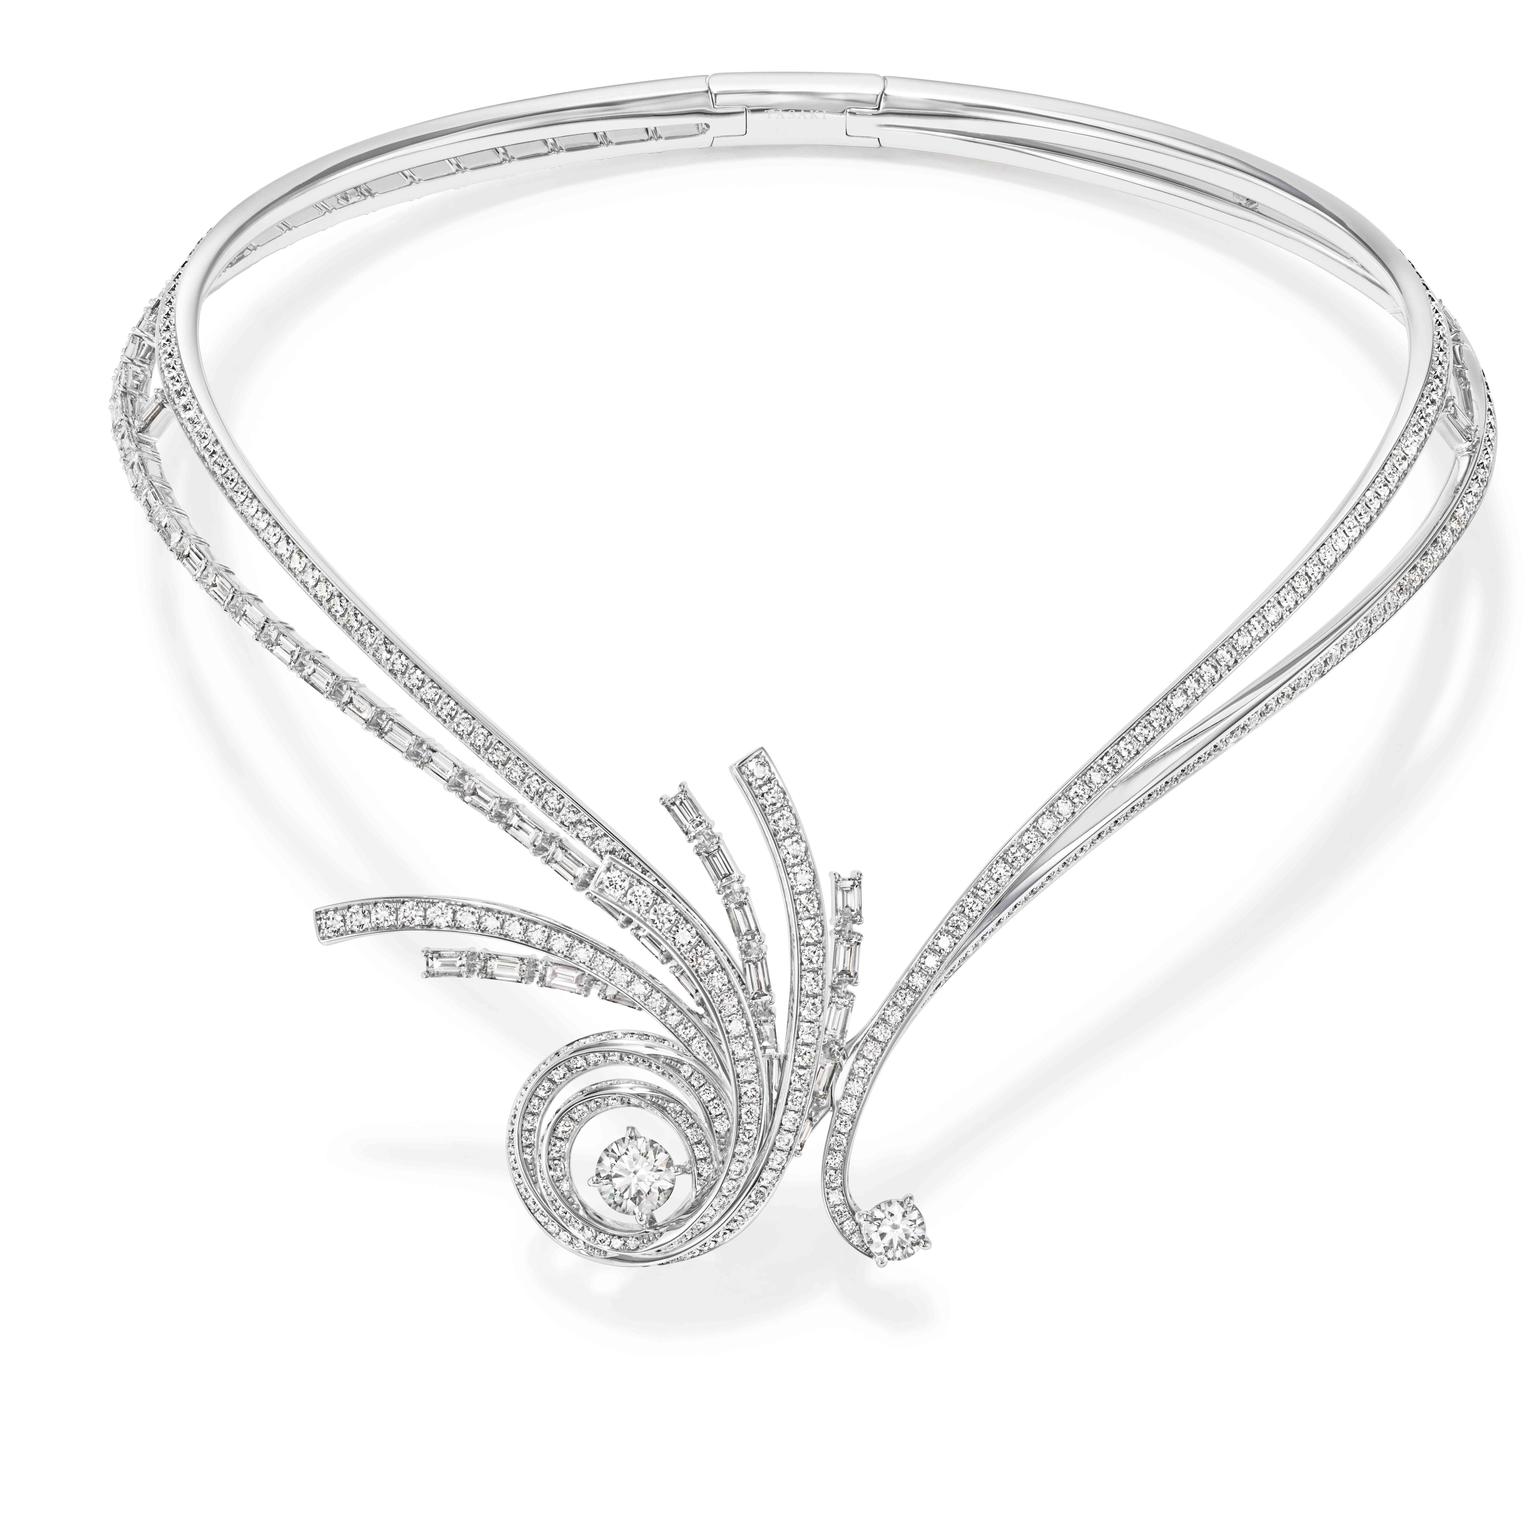 Swirl Necklace by Tasaki - high jewellery collection 2023 (16.22ct, Baguette Cut, Round Brilliant Cut)